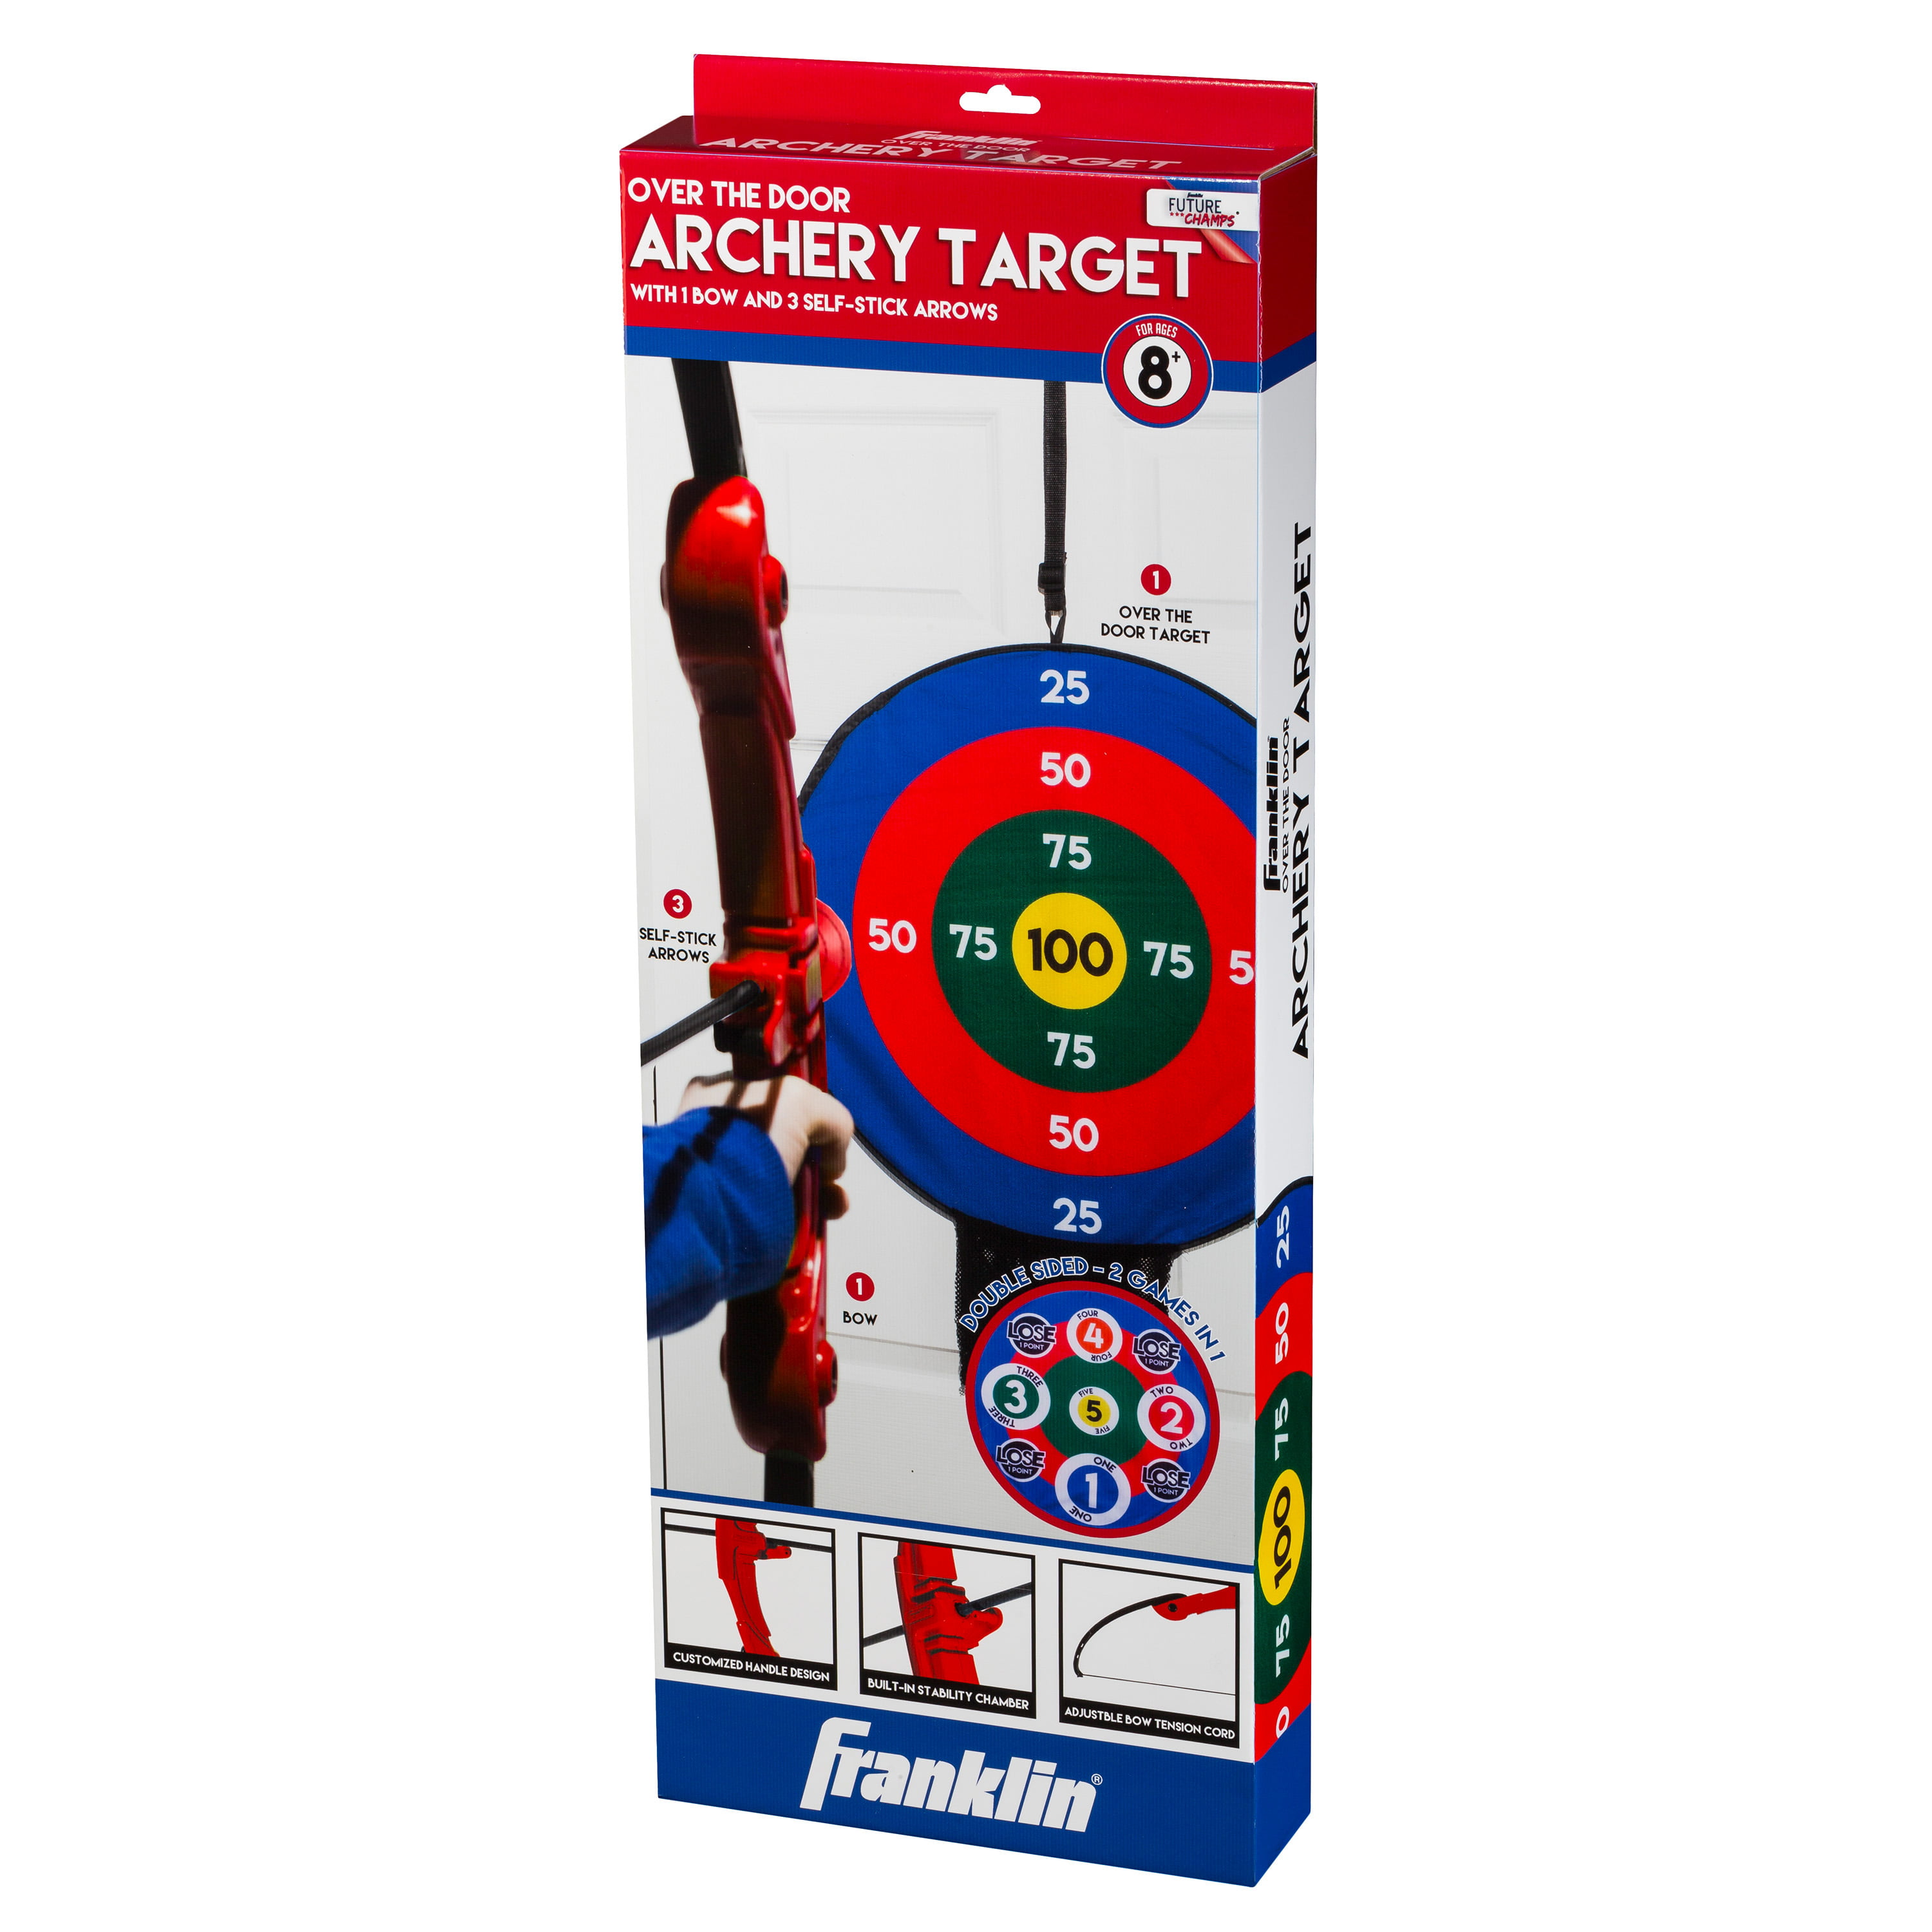 Red/Blue Perfect for Indoor Play Over The Door Height-Adjustable Target 3 Self-Stick Arrows Franklin Sports Kids Archery Target Set 1 Bow 